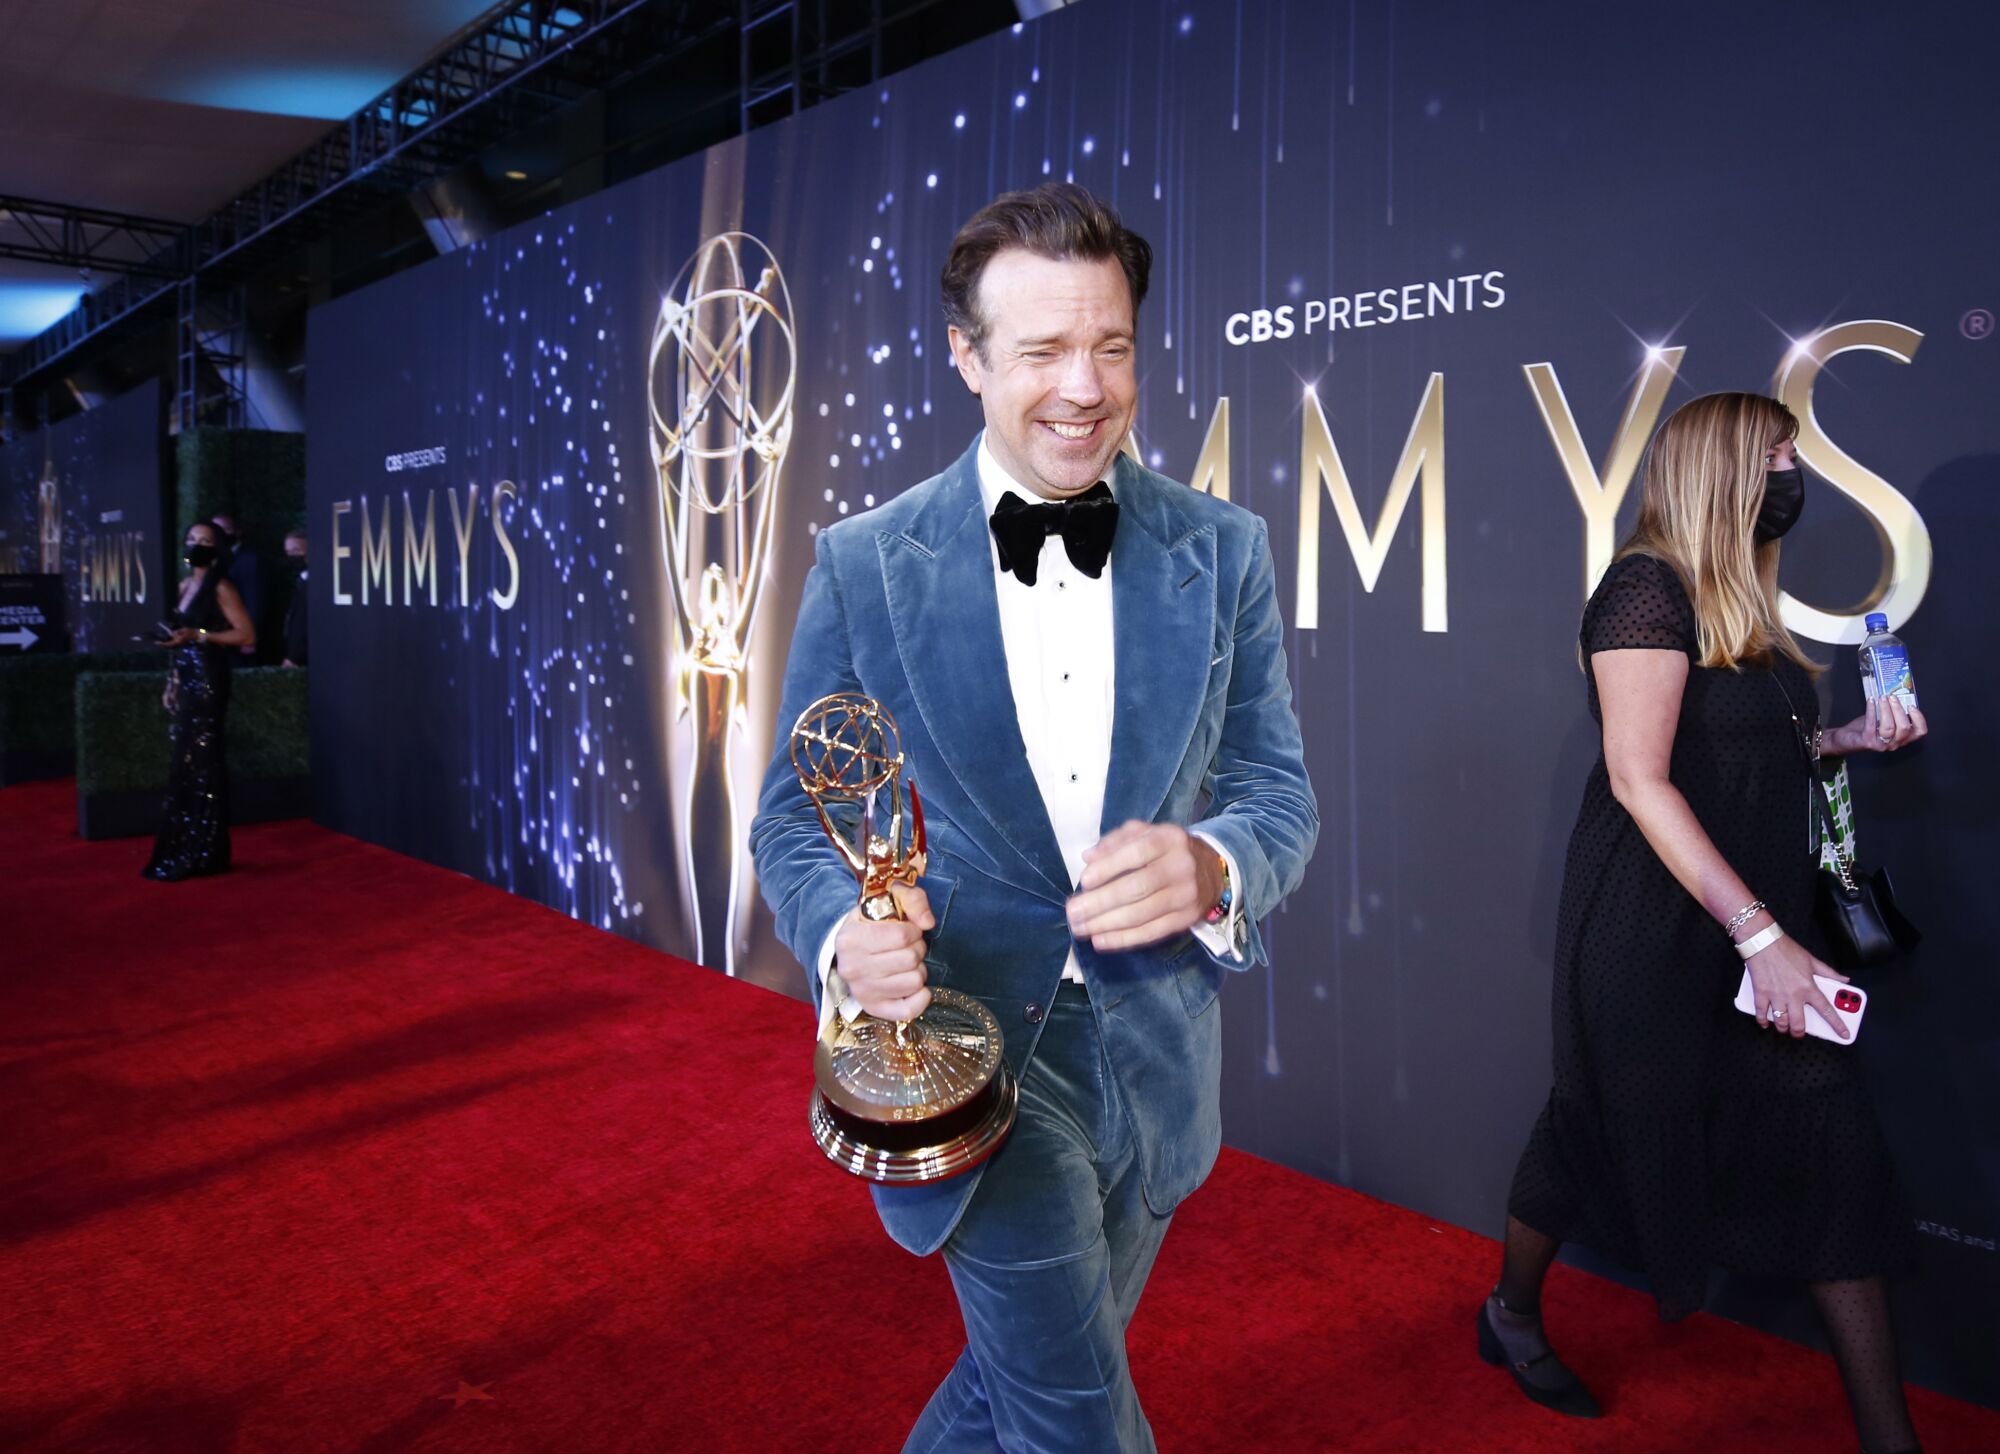 Jason Sudeikis with his award at the 73rd Emmy Awards.